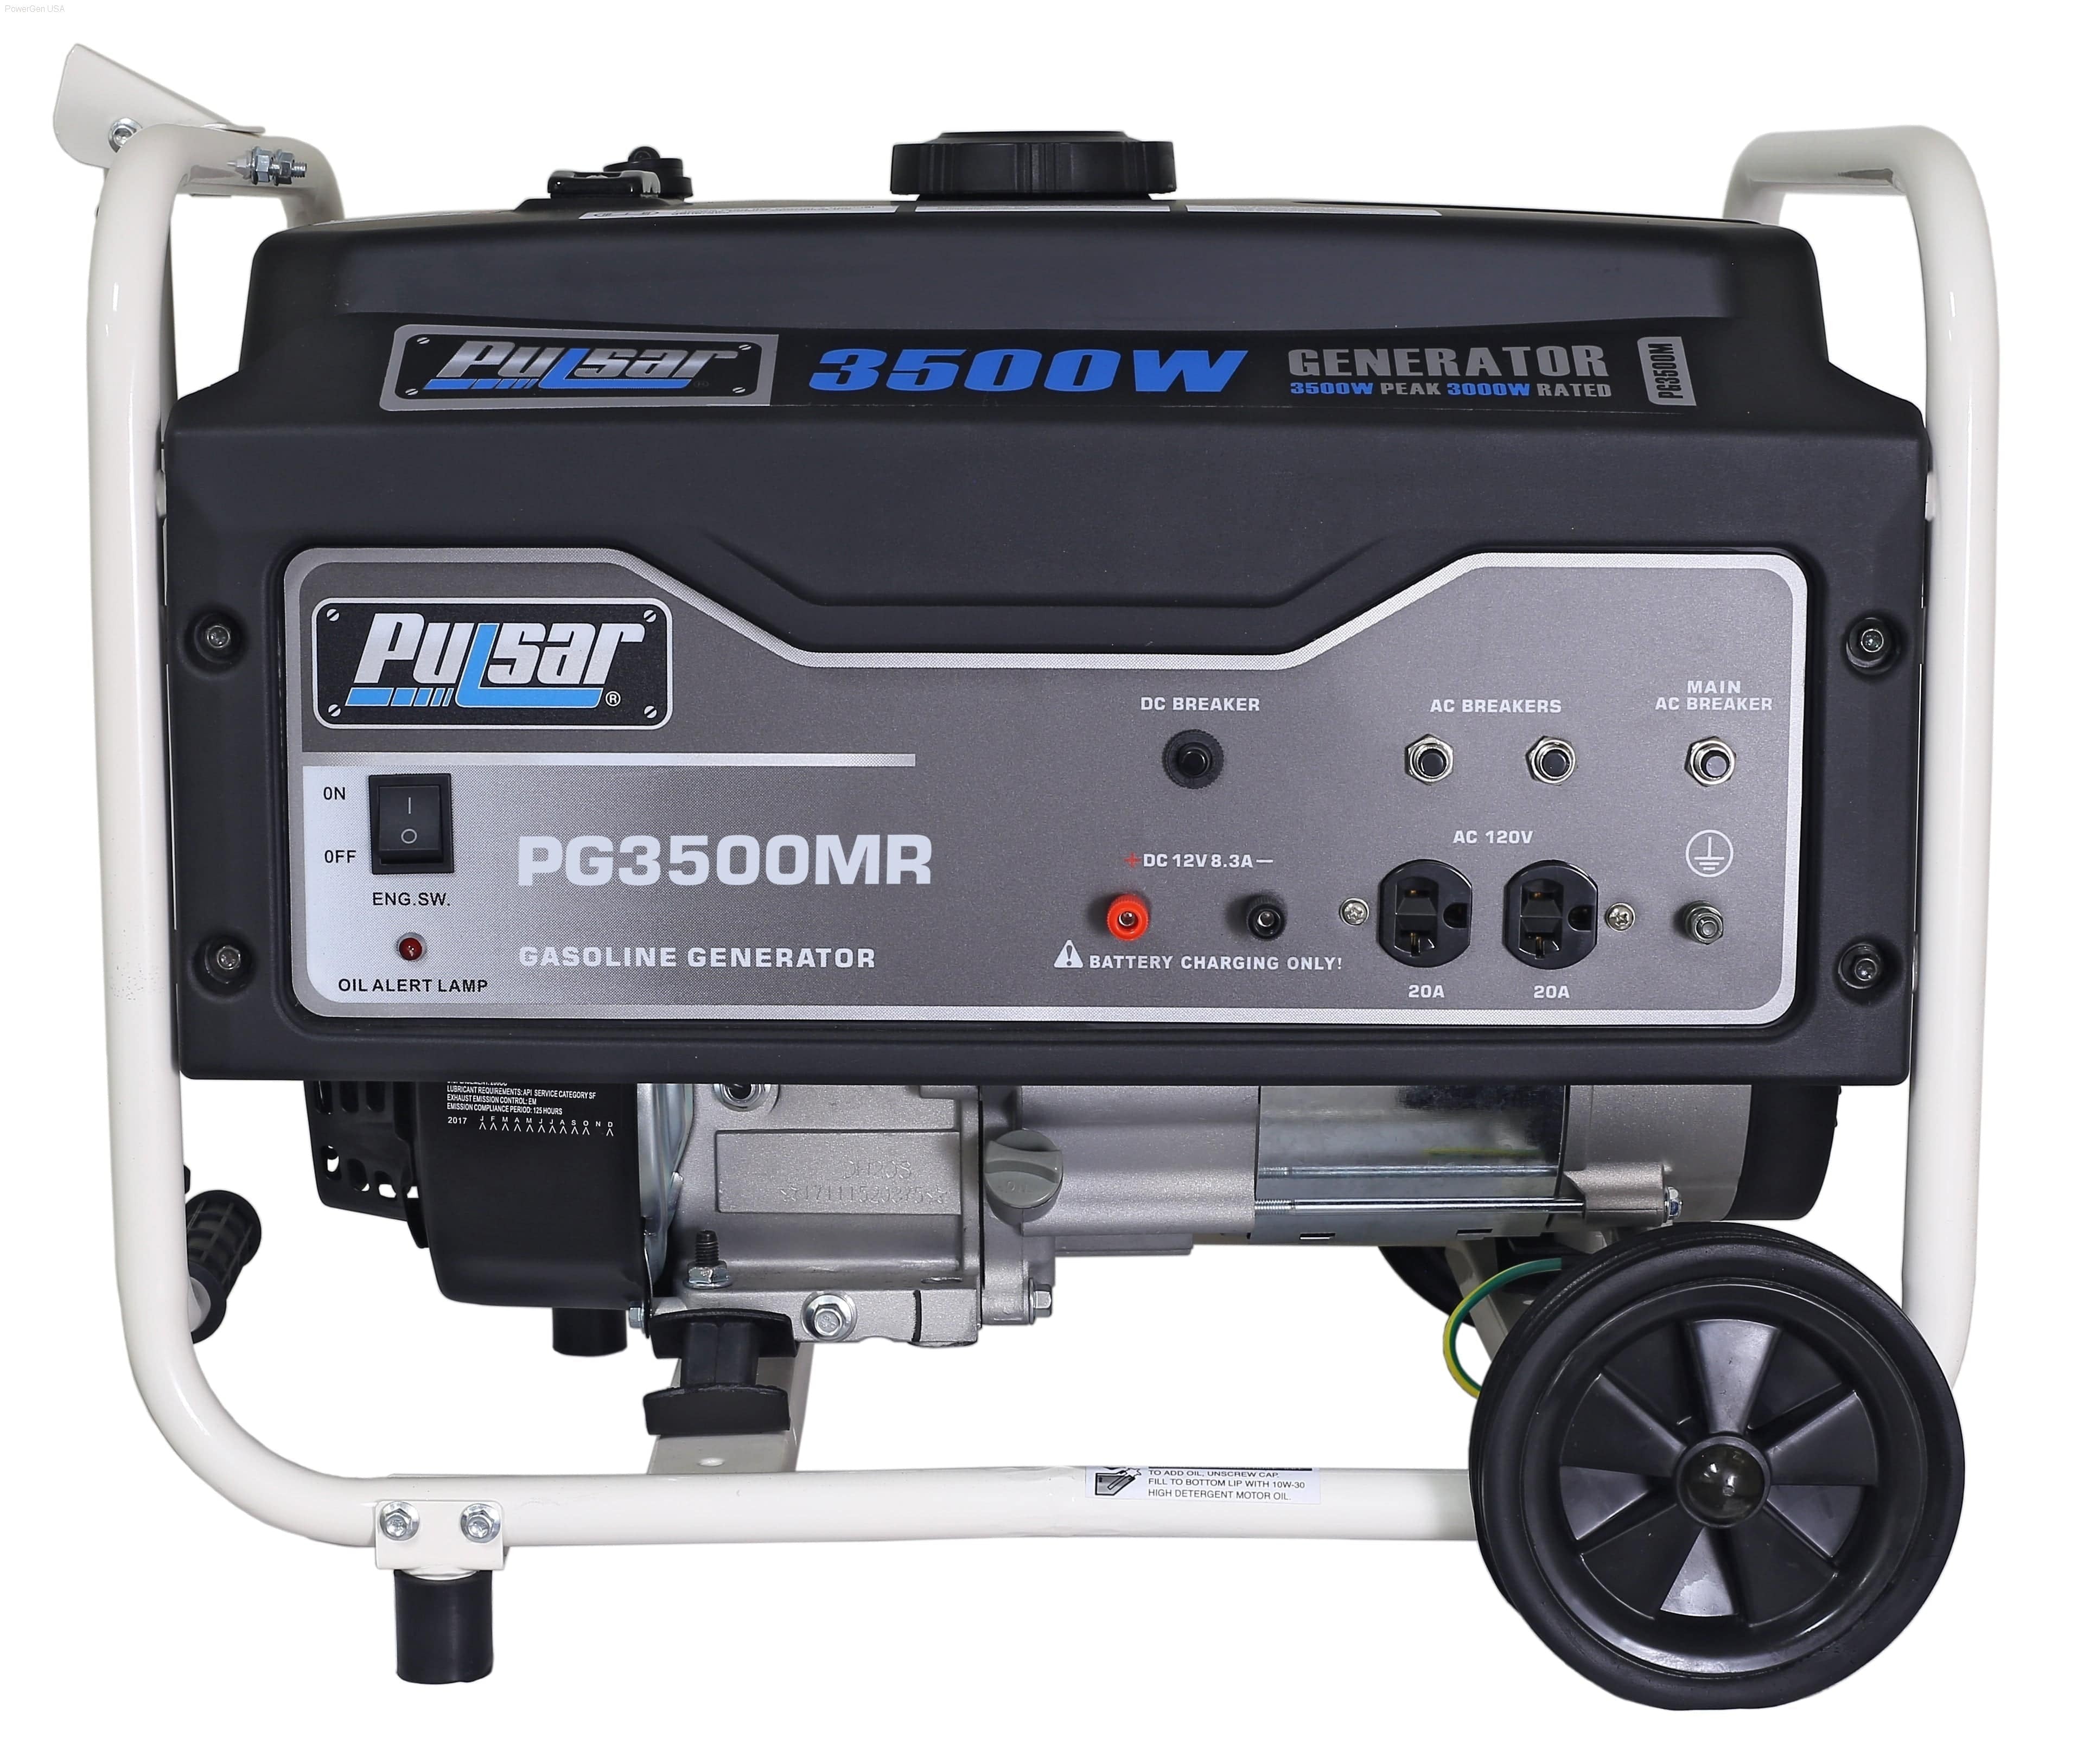 Pulsar Products PG7500 7500W/6000W Gas Electric Start Portable